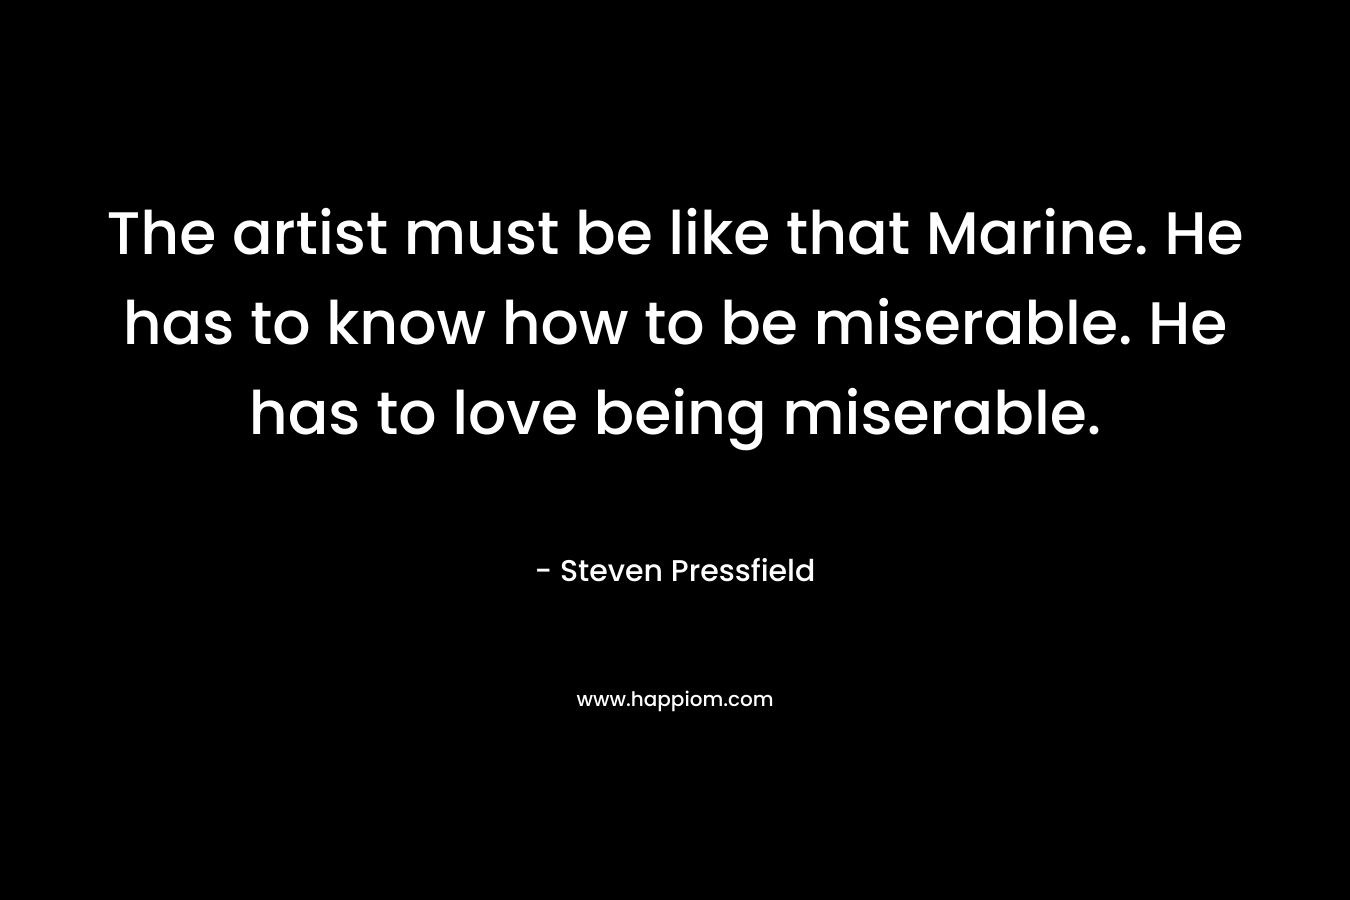 The artist must be like that Marine. He has to know how to be miserable. He has to love being miserable. – Steven Pressfield